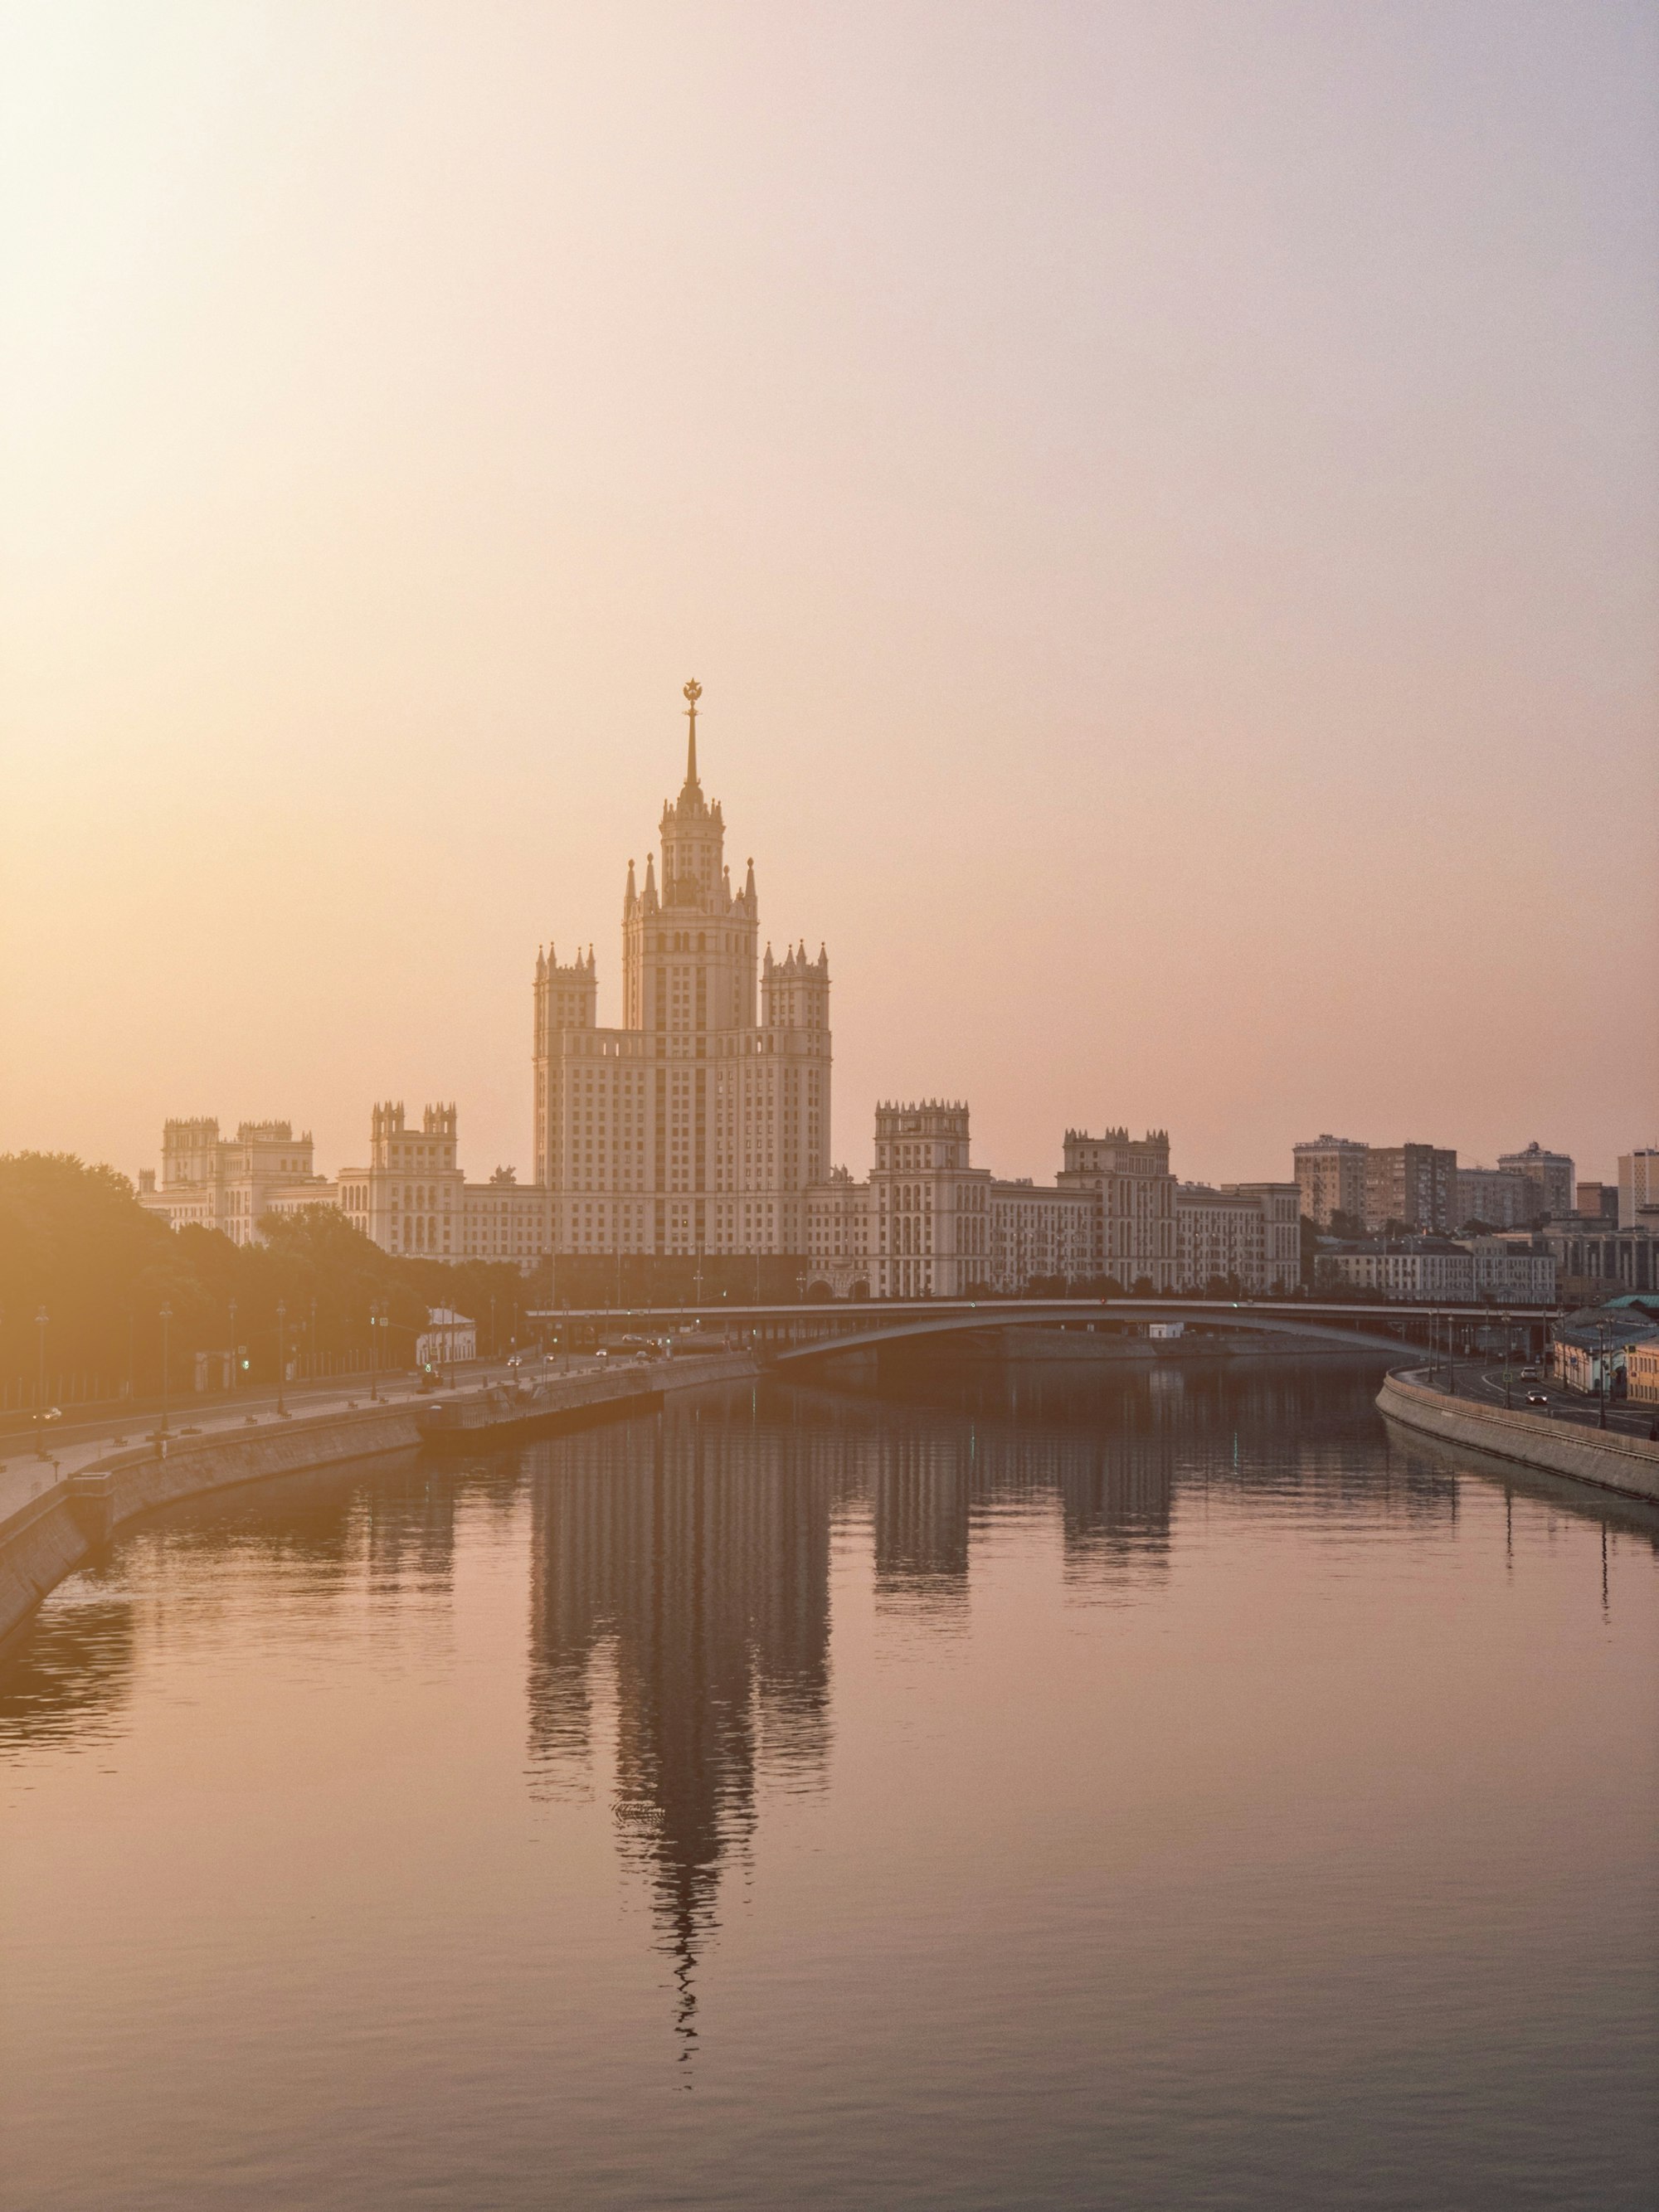 Moscow mayor's office will cancel fines for businesses for violations of covid restrictions and reimburse already paid